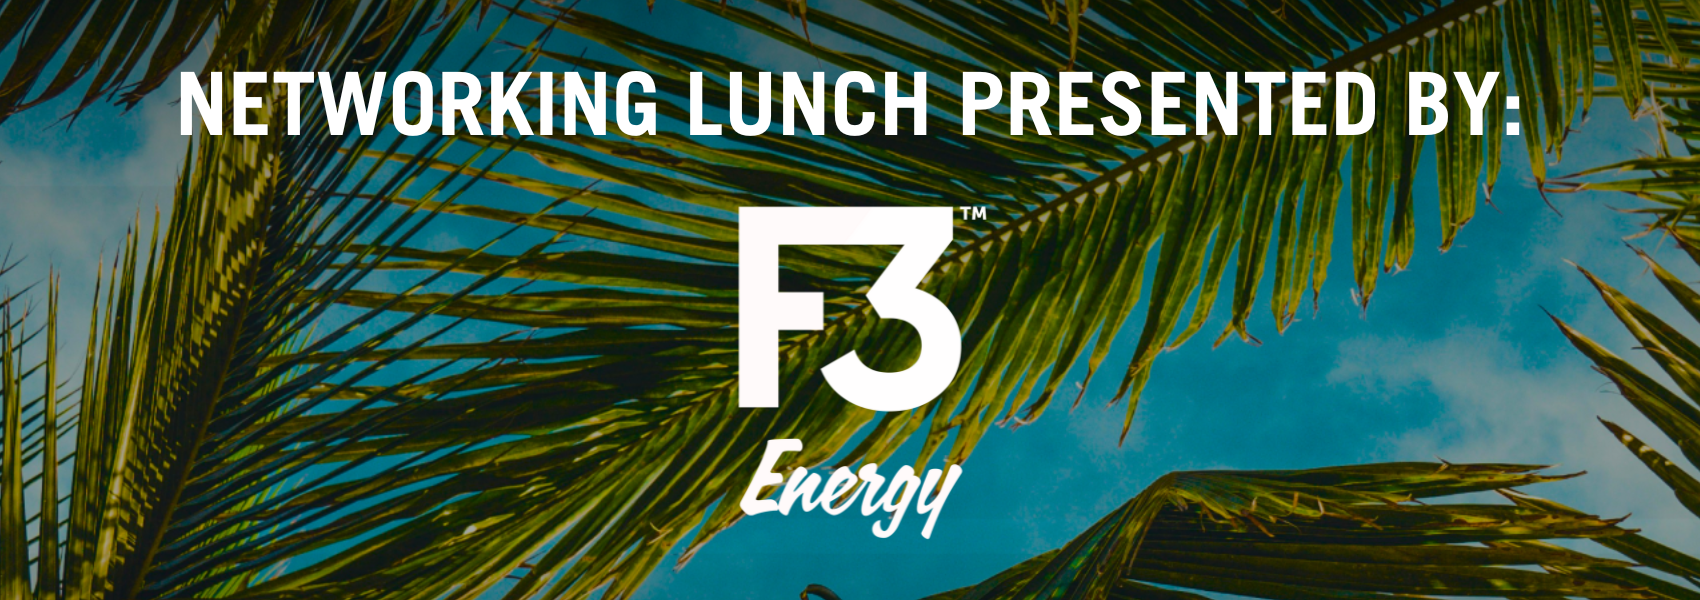 Networking Lunch Sponsored by: F3 Energy